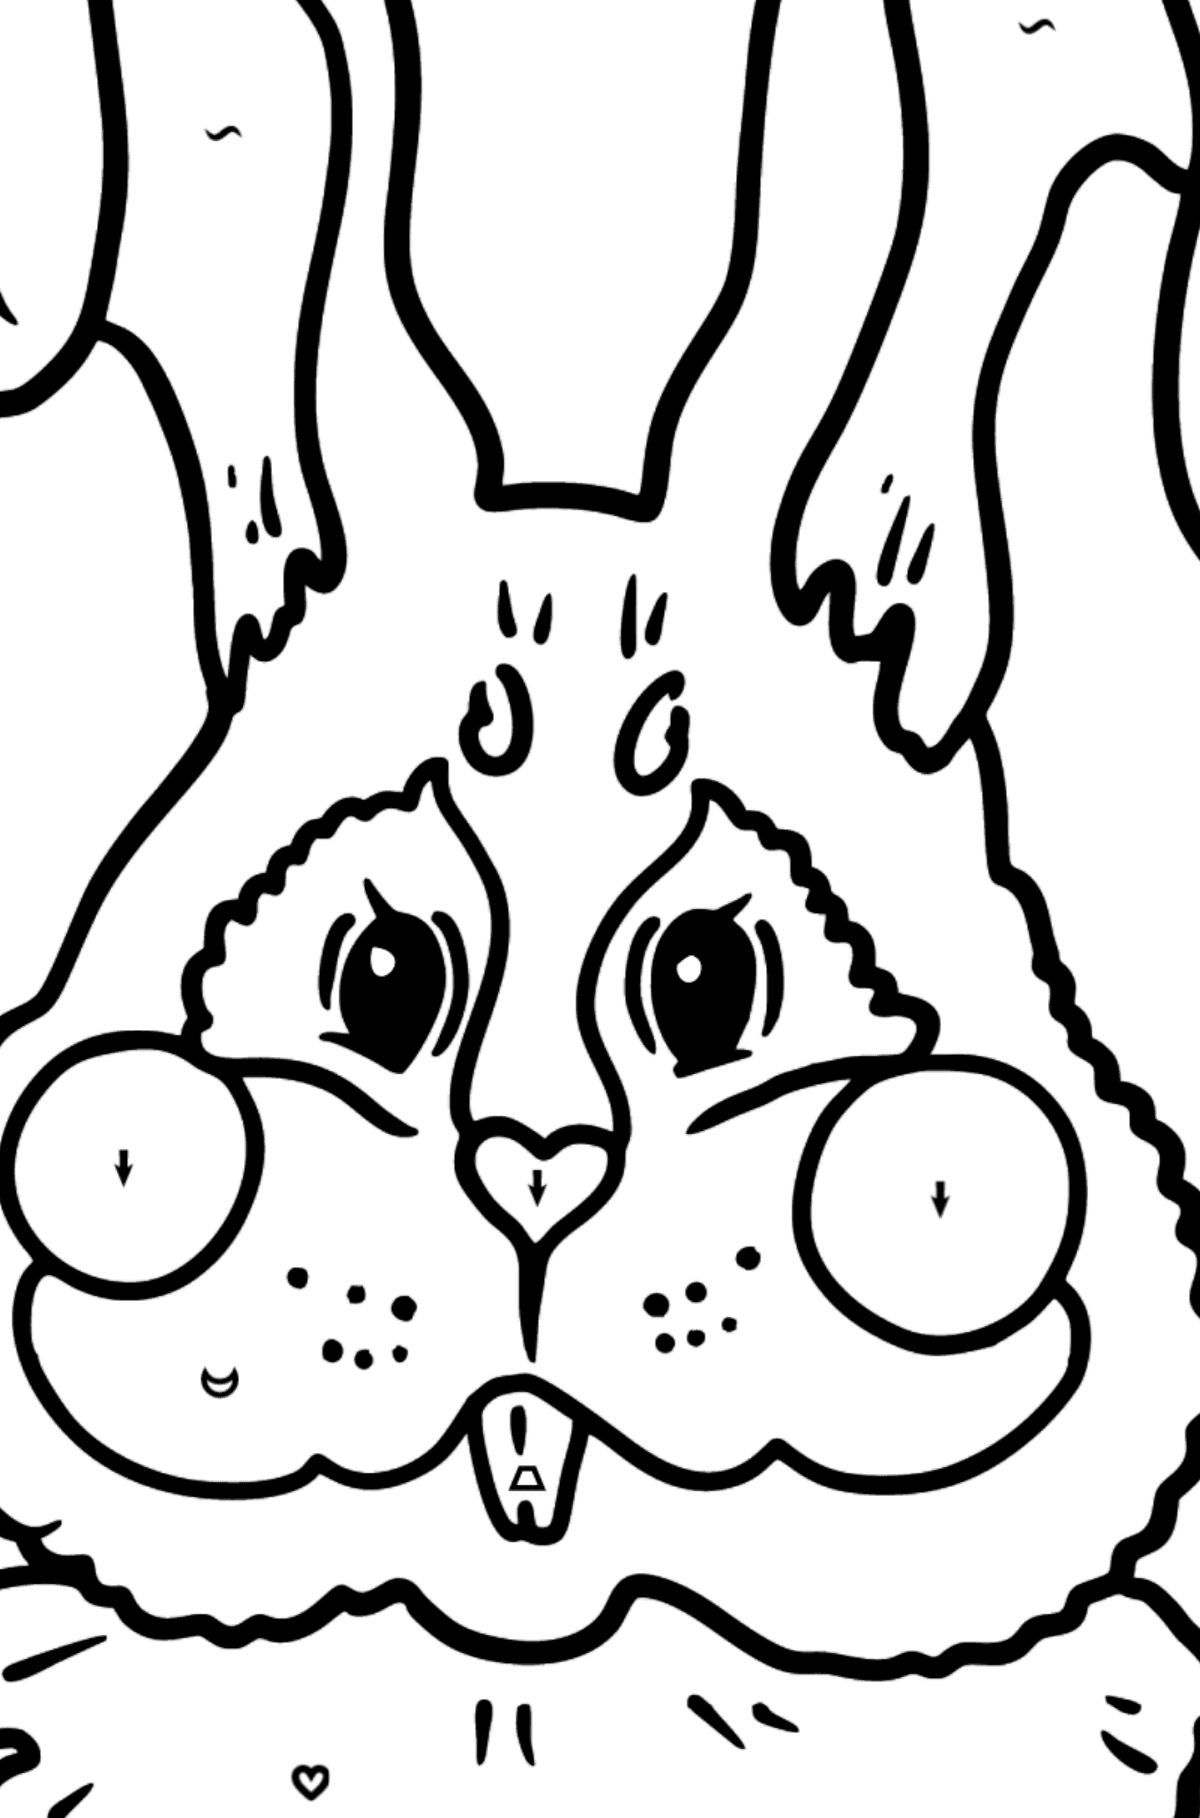 Bunny Face coloring page - Coloring by Symbols and Geometric Shapes for Kids